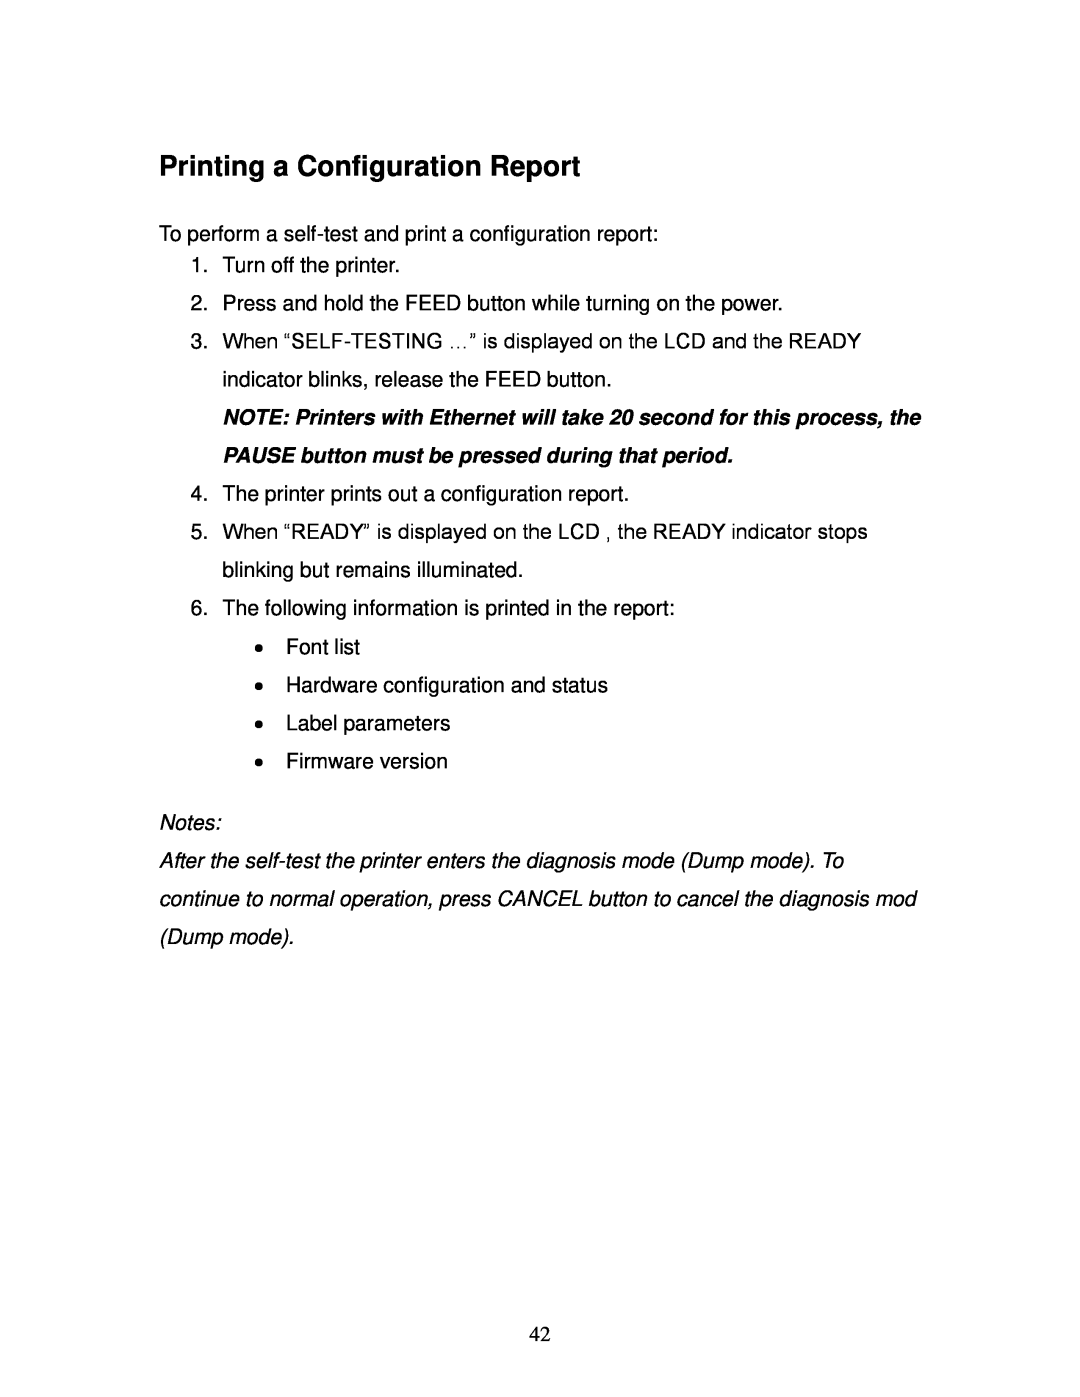 AMT Datasouth 4600 manual Printing a Configuration Report 